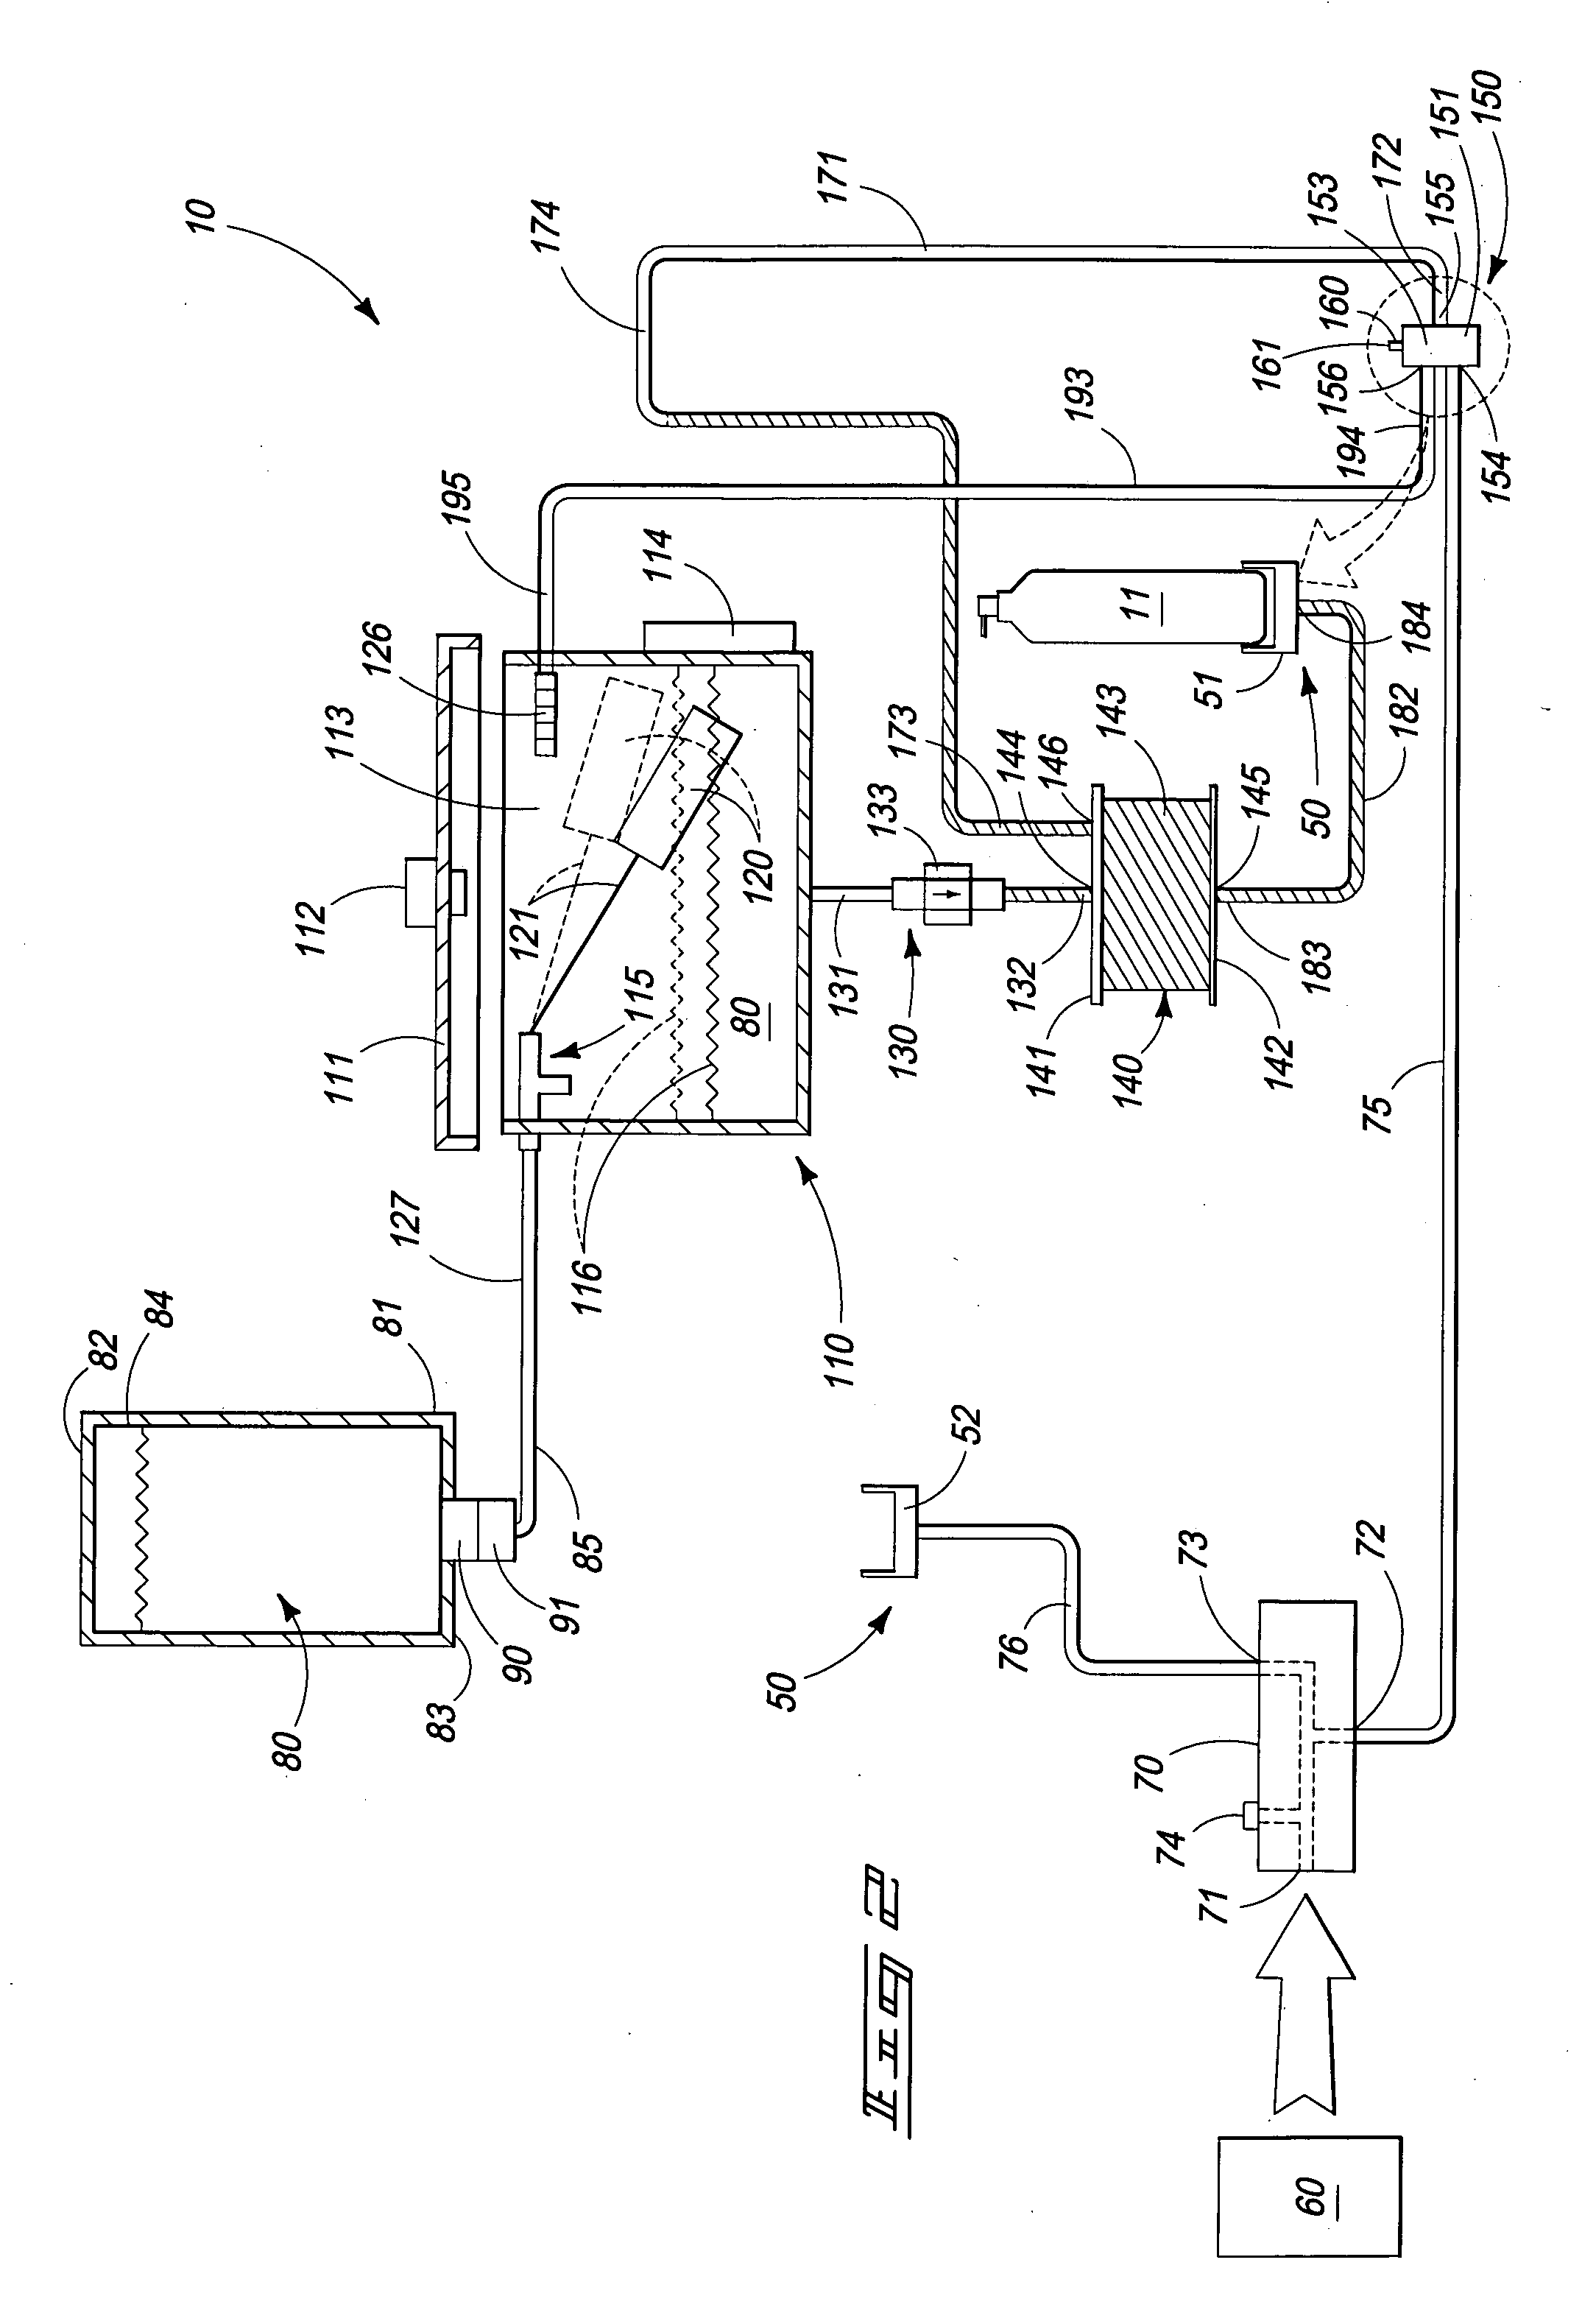 Apparatus and method for refilling a refillable container